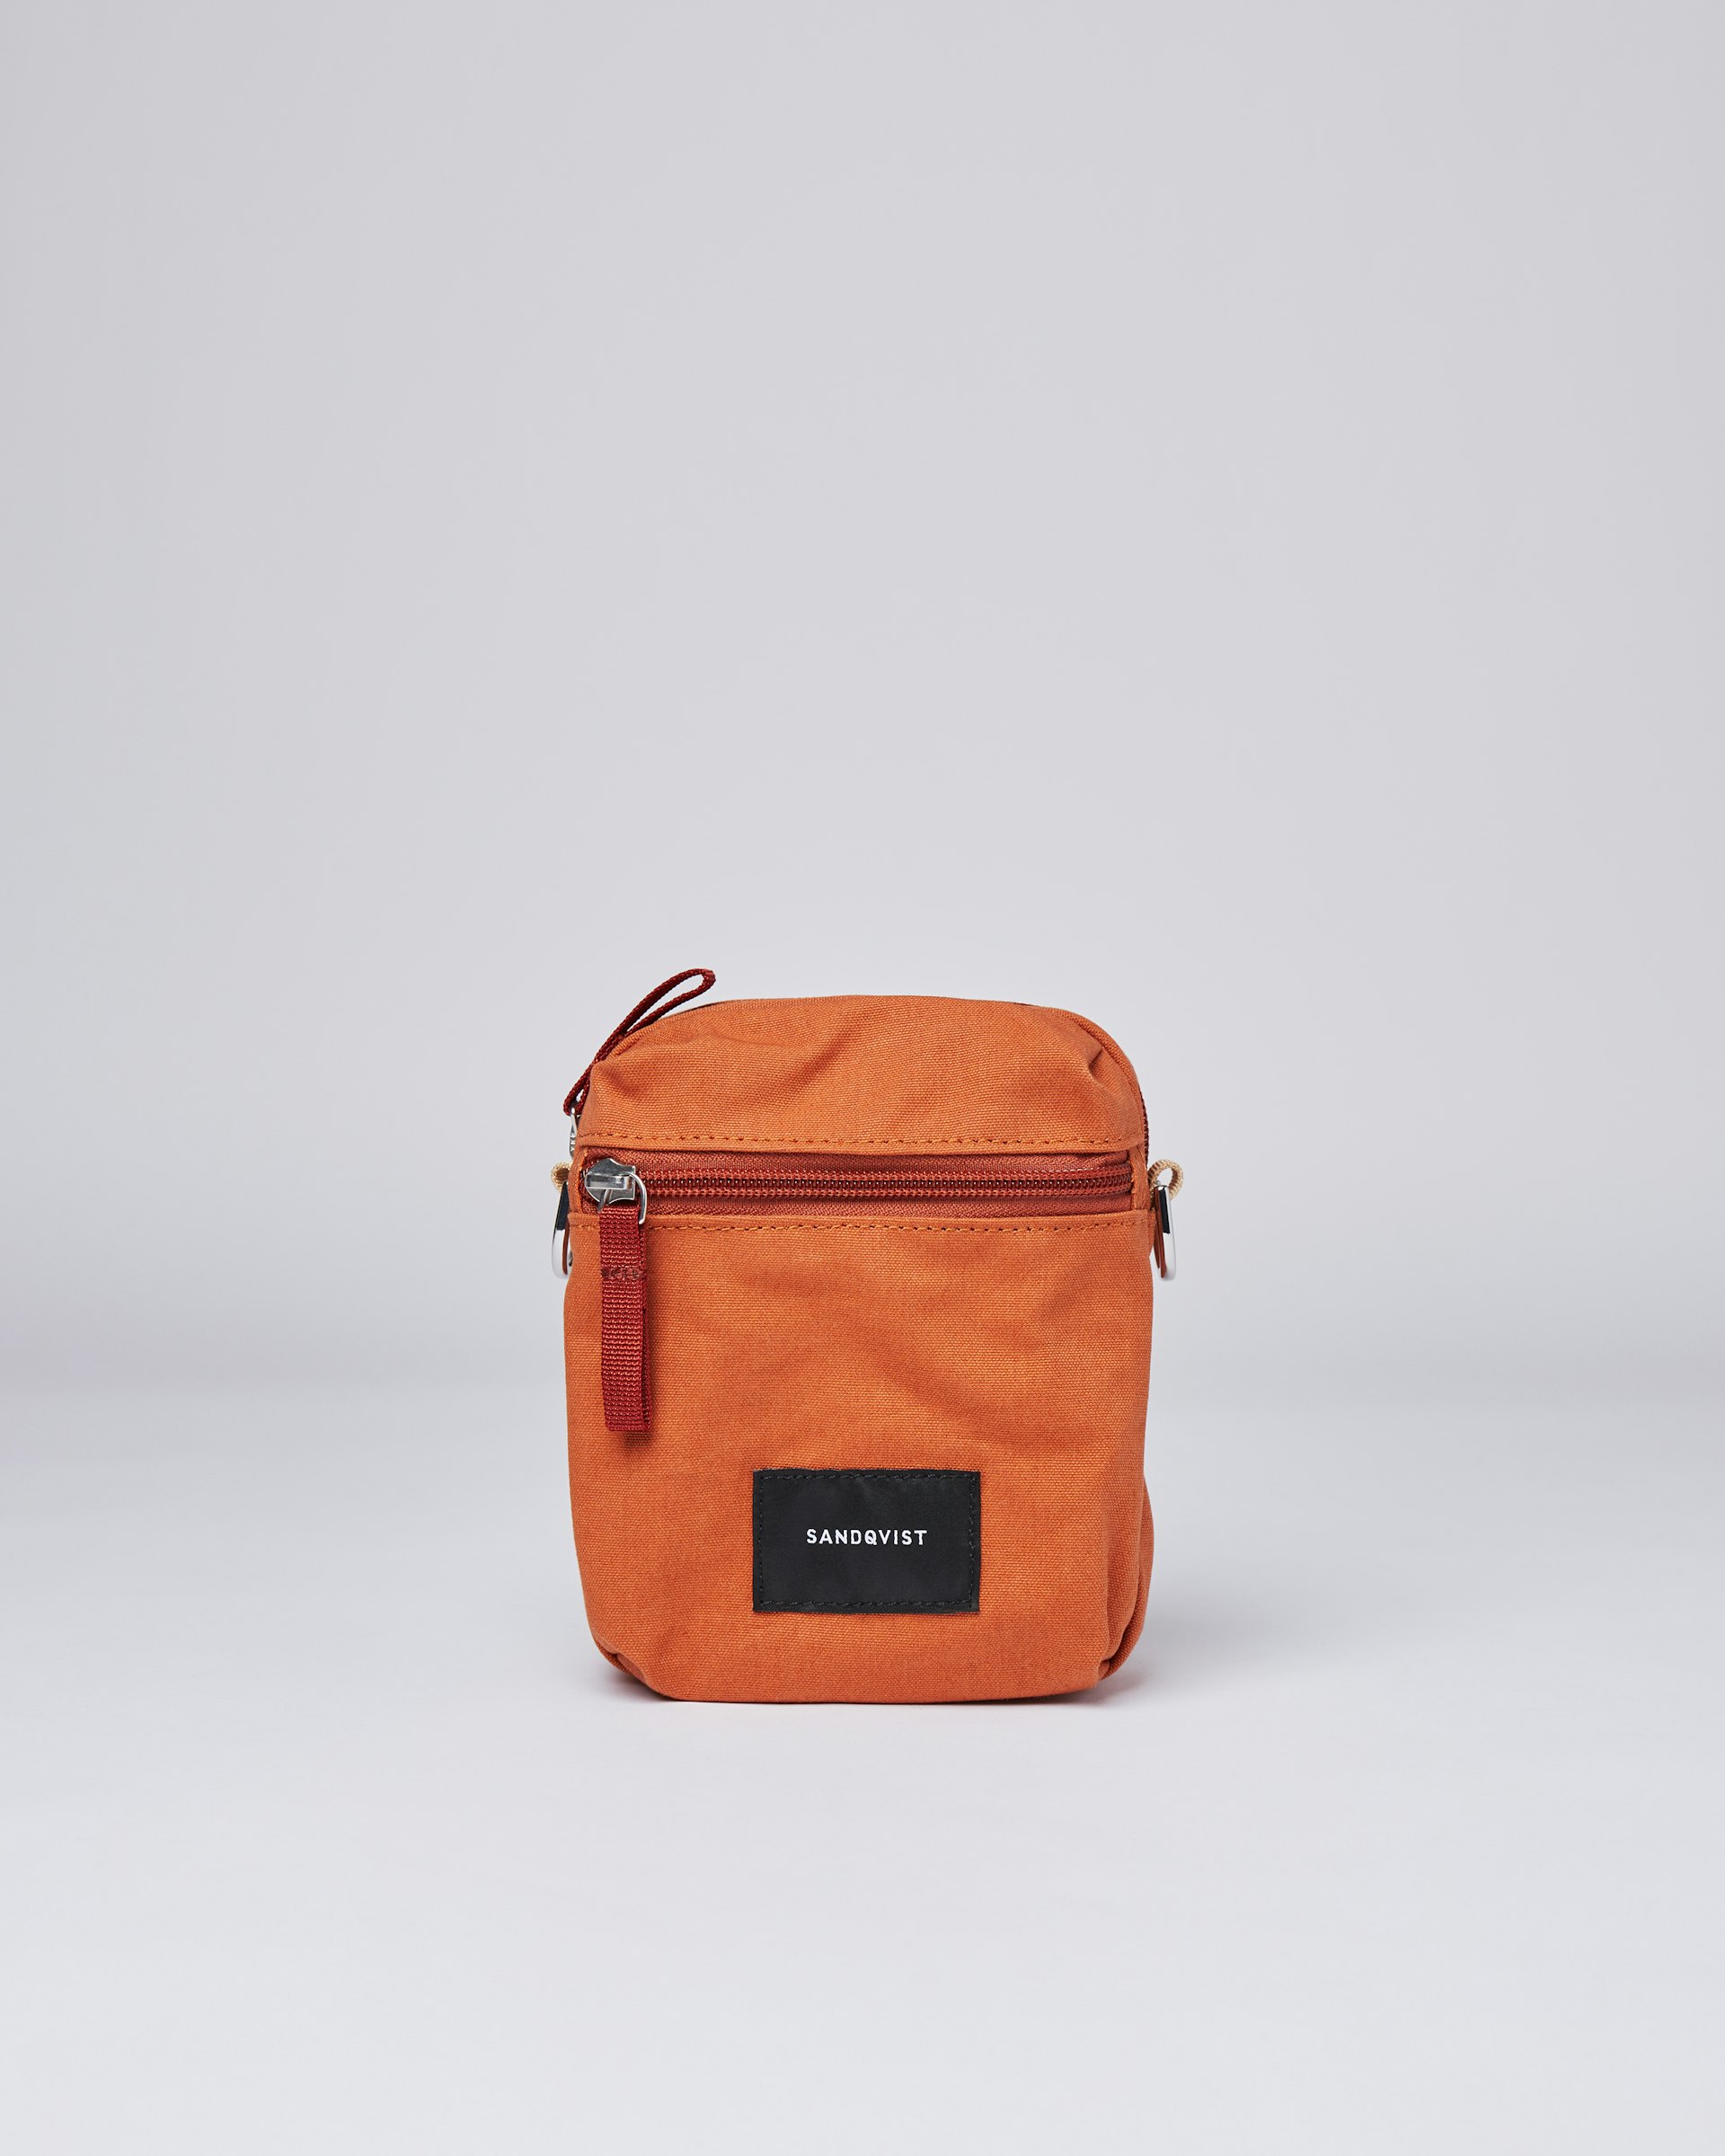 Sixten Vegan belongs to the category Shoulder bags and is in color orange with orange webbing (1 of 5)